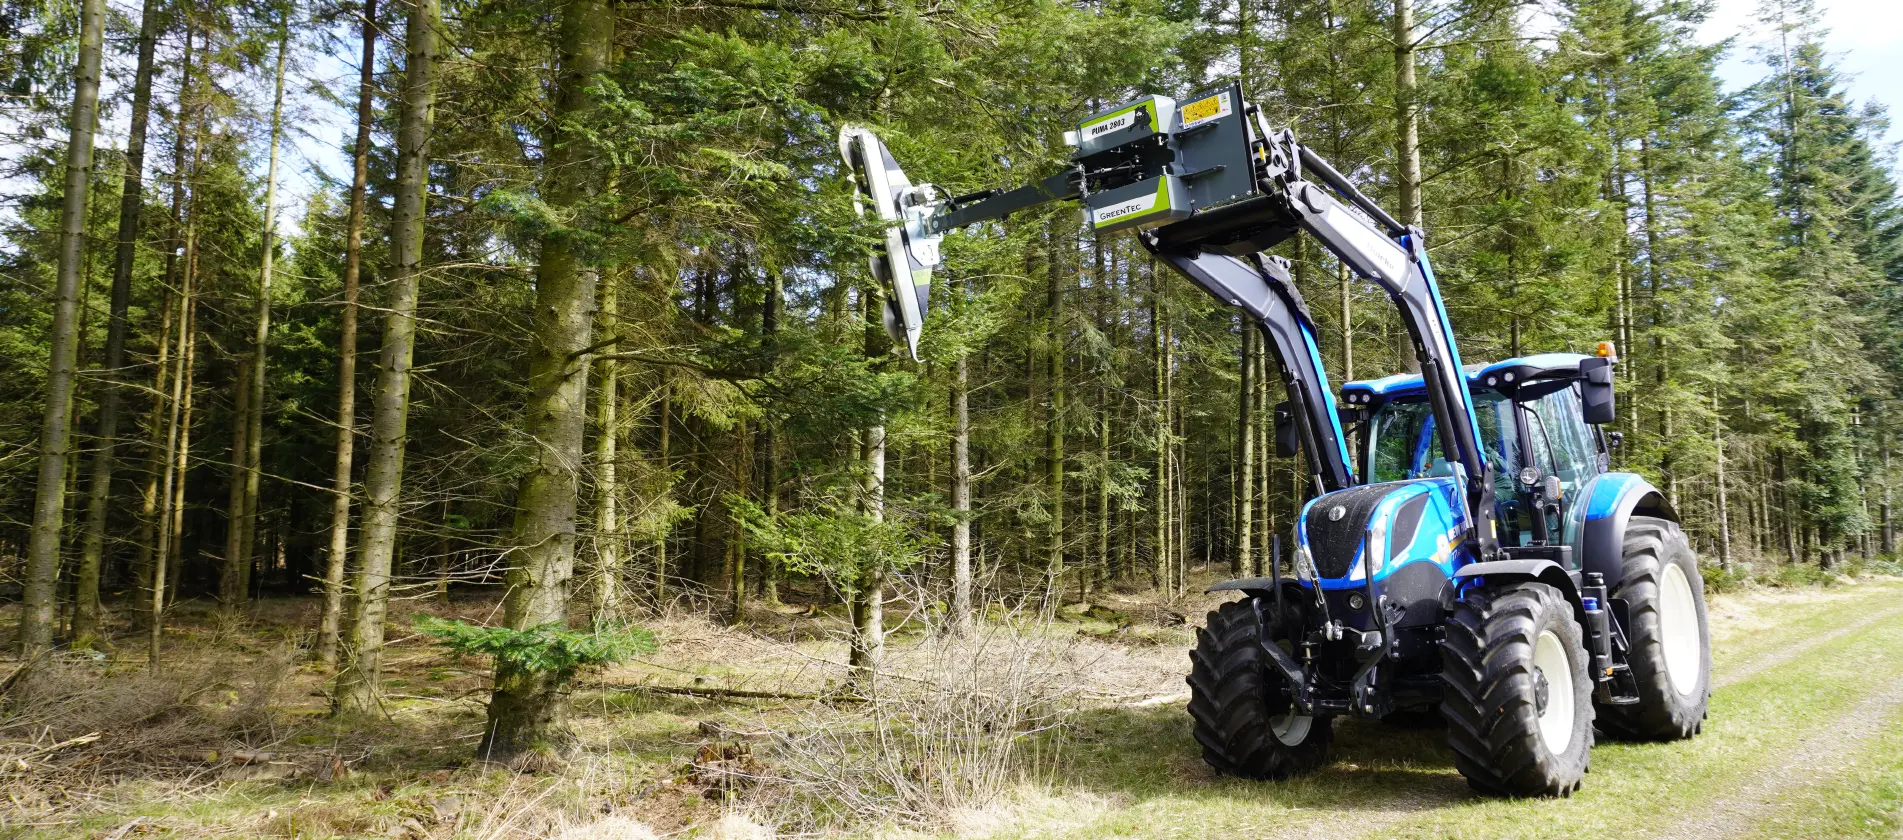 Forestry equipment for tree maintenance